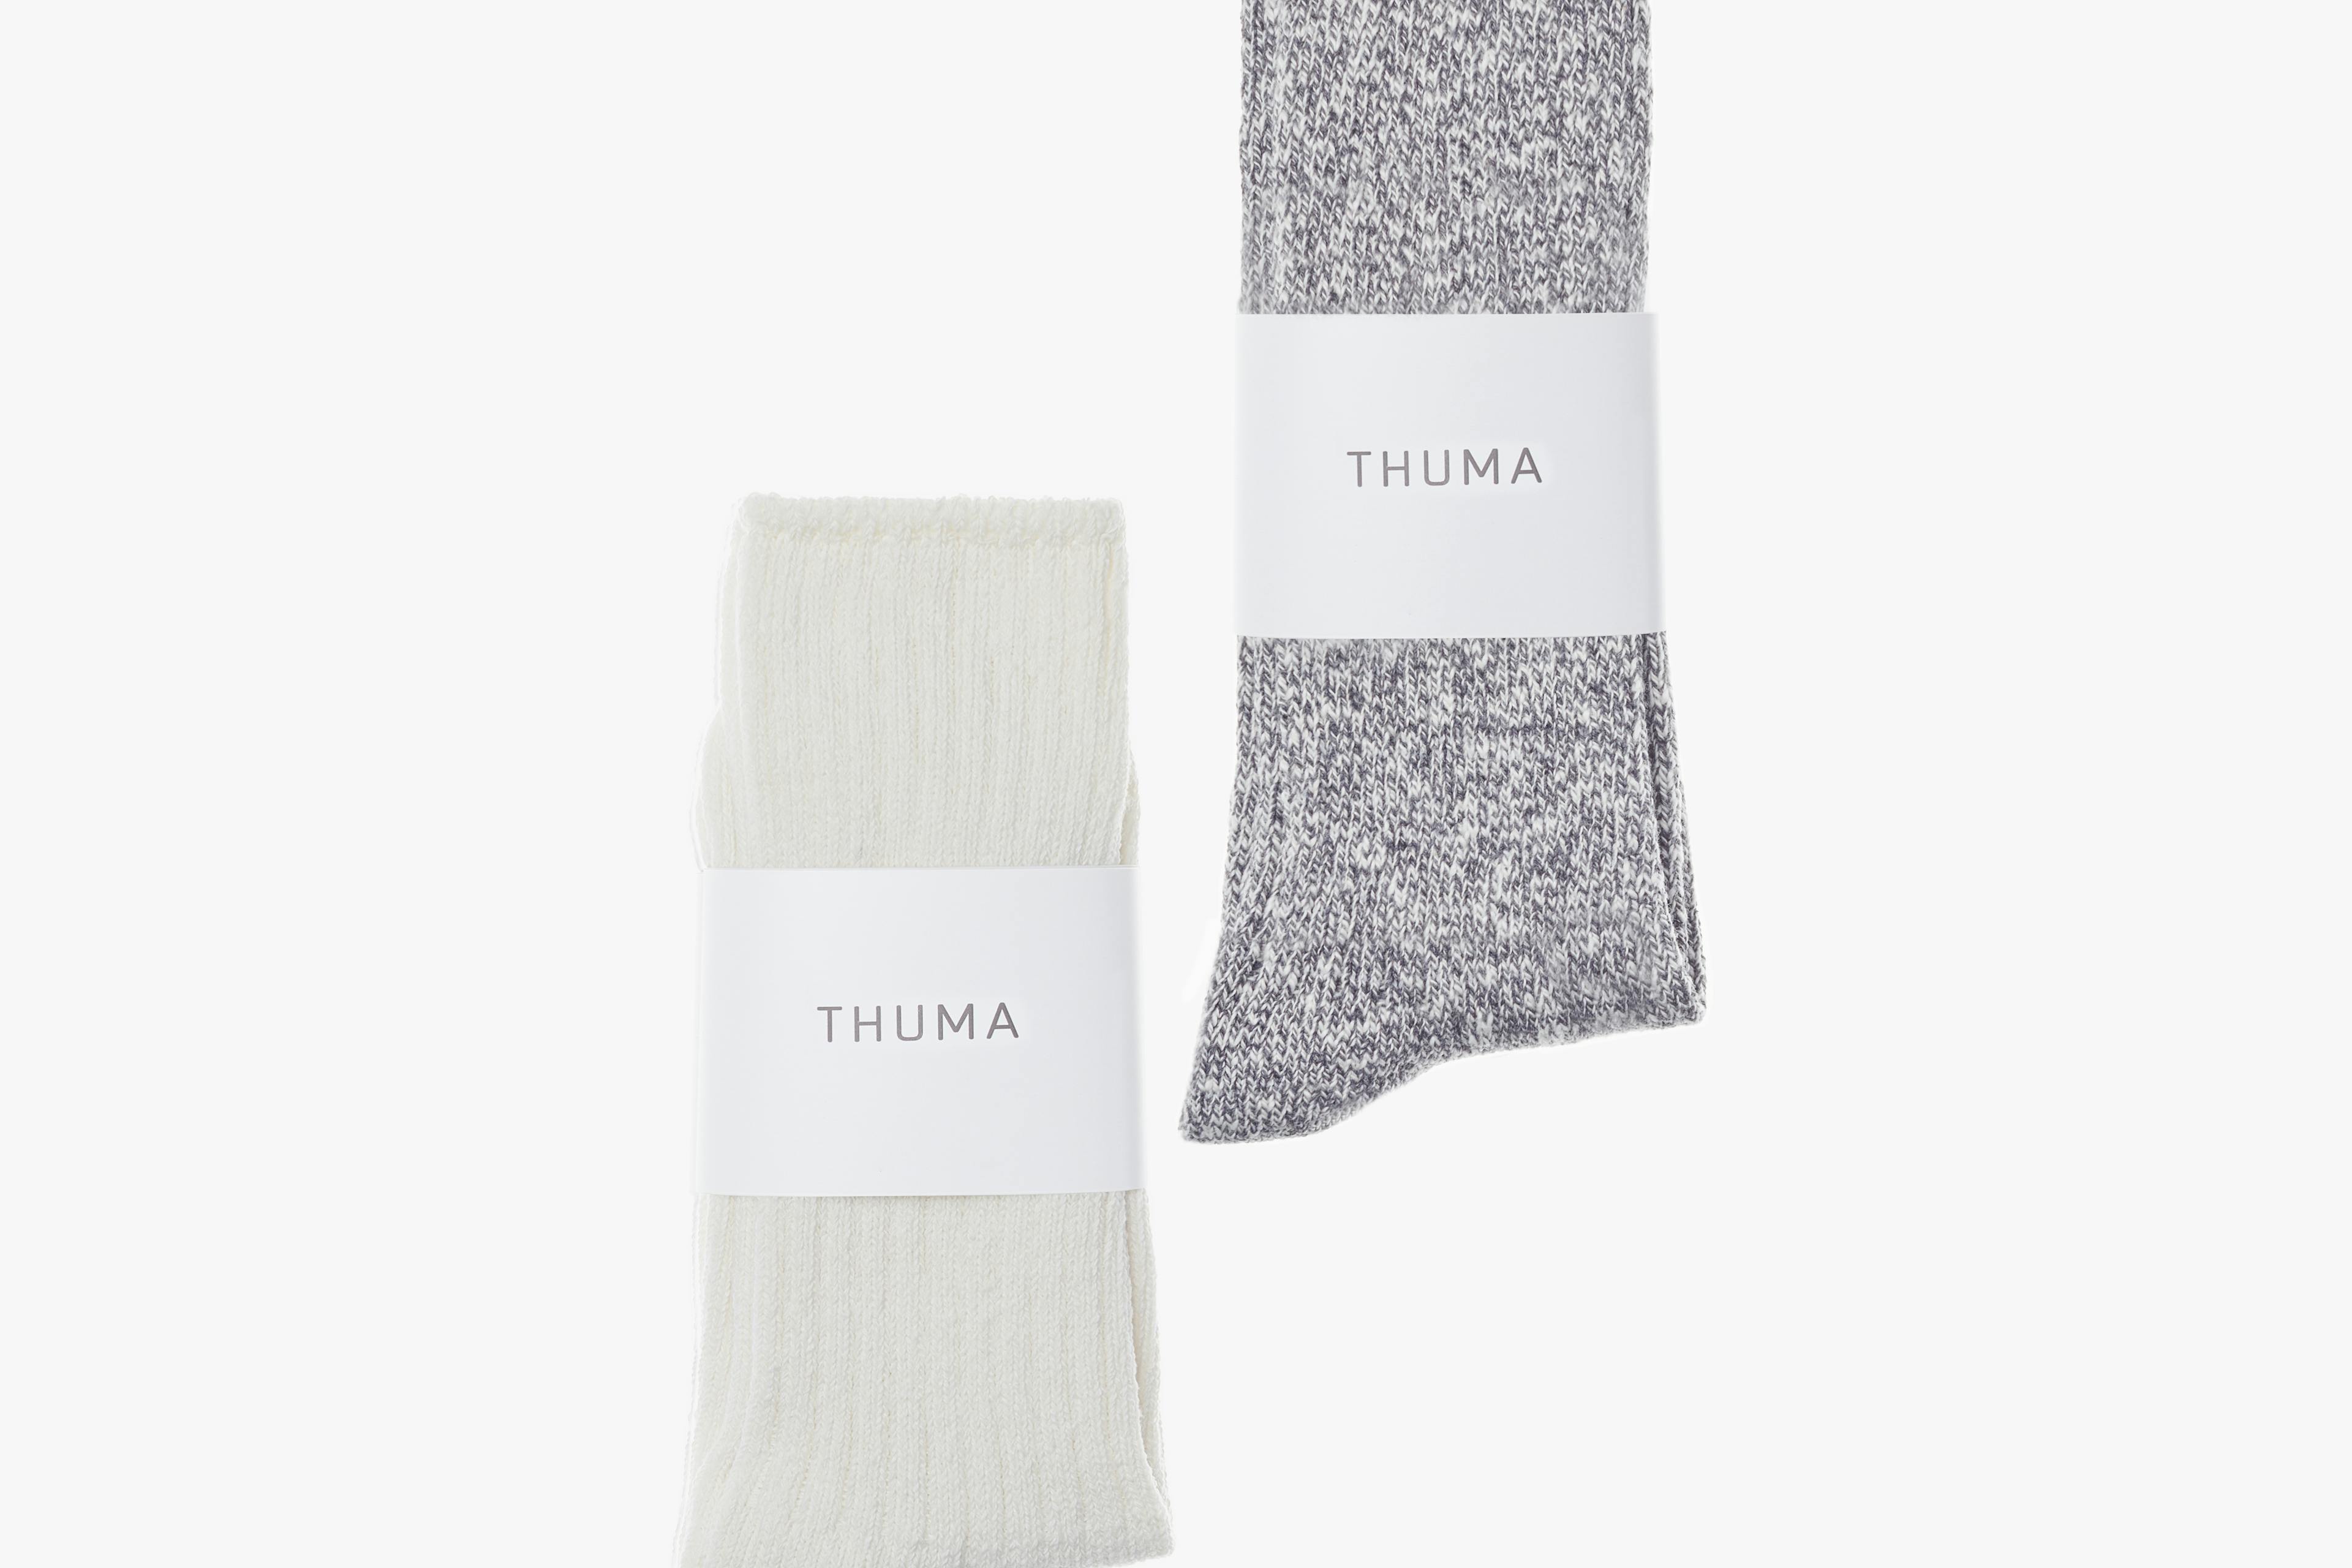 Pair of Thuma Lounge & Leisure Socks in Natural White Color